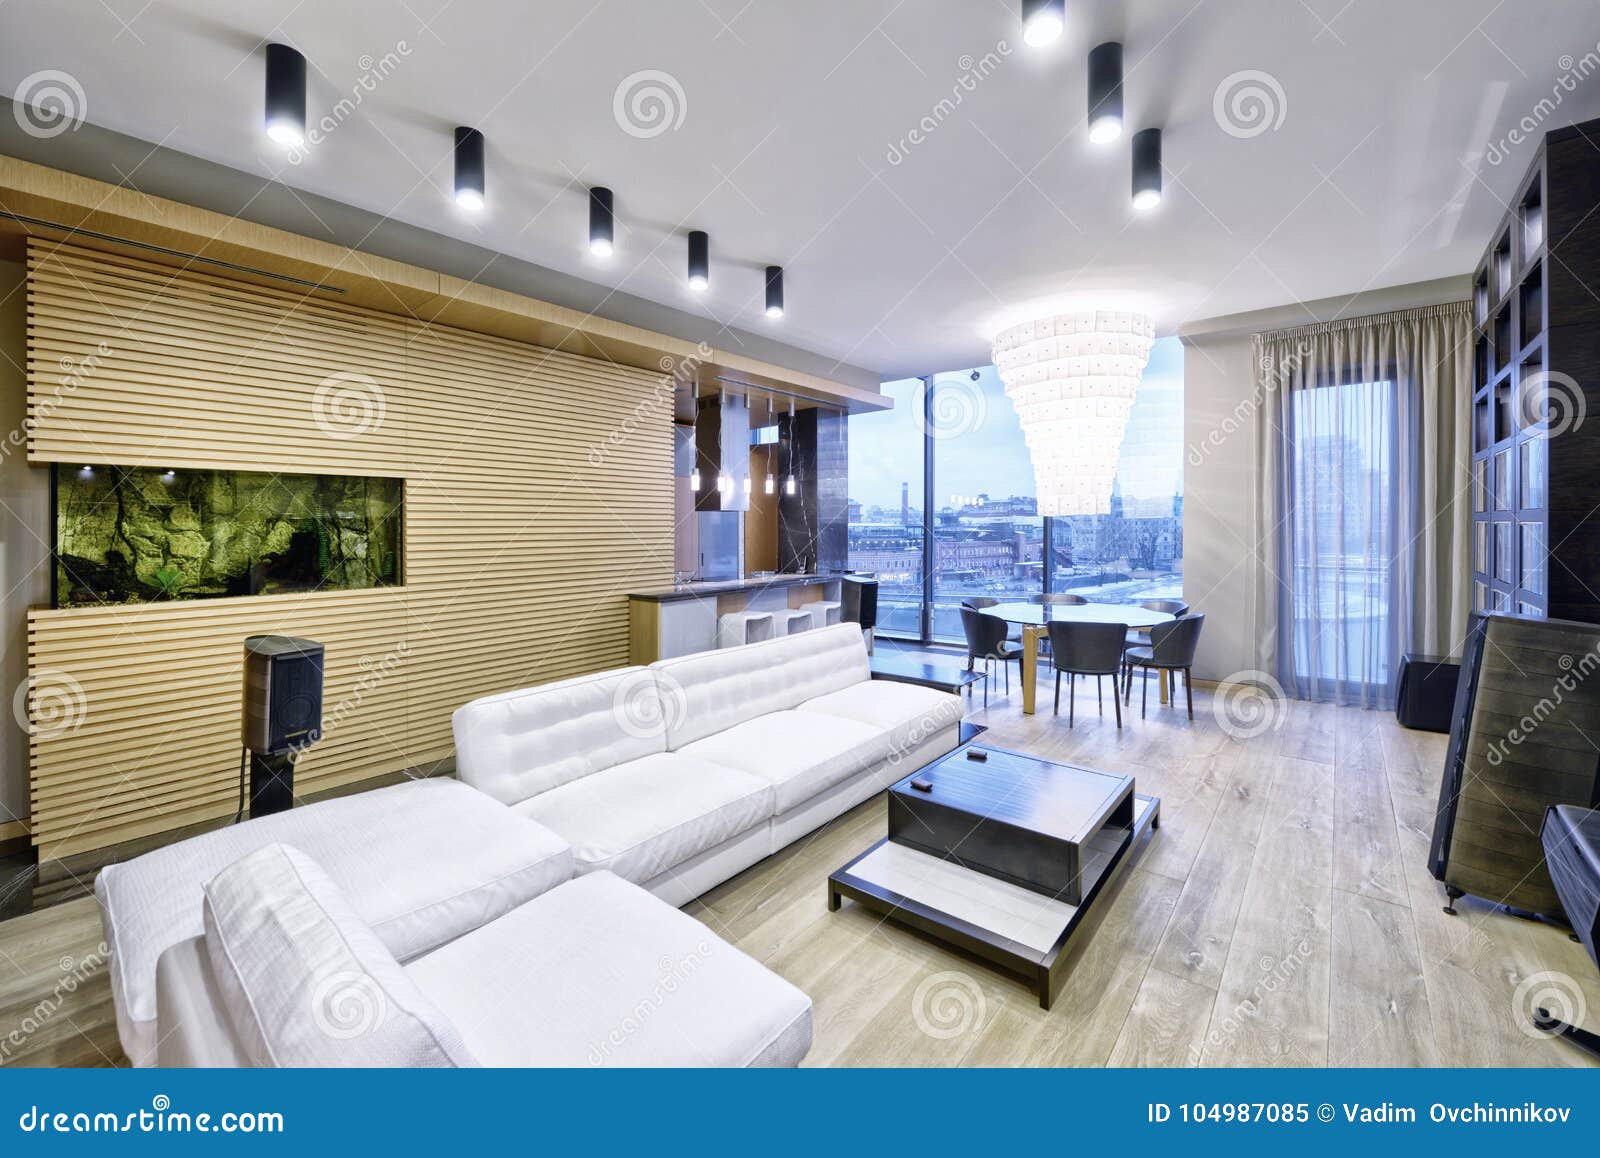 Living Room Interior In Modern House Stock Image Image Of